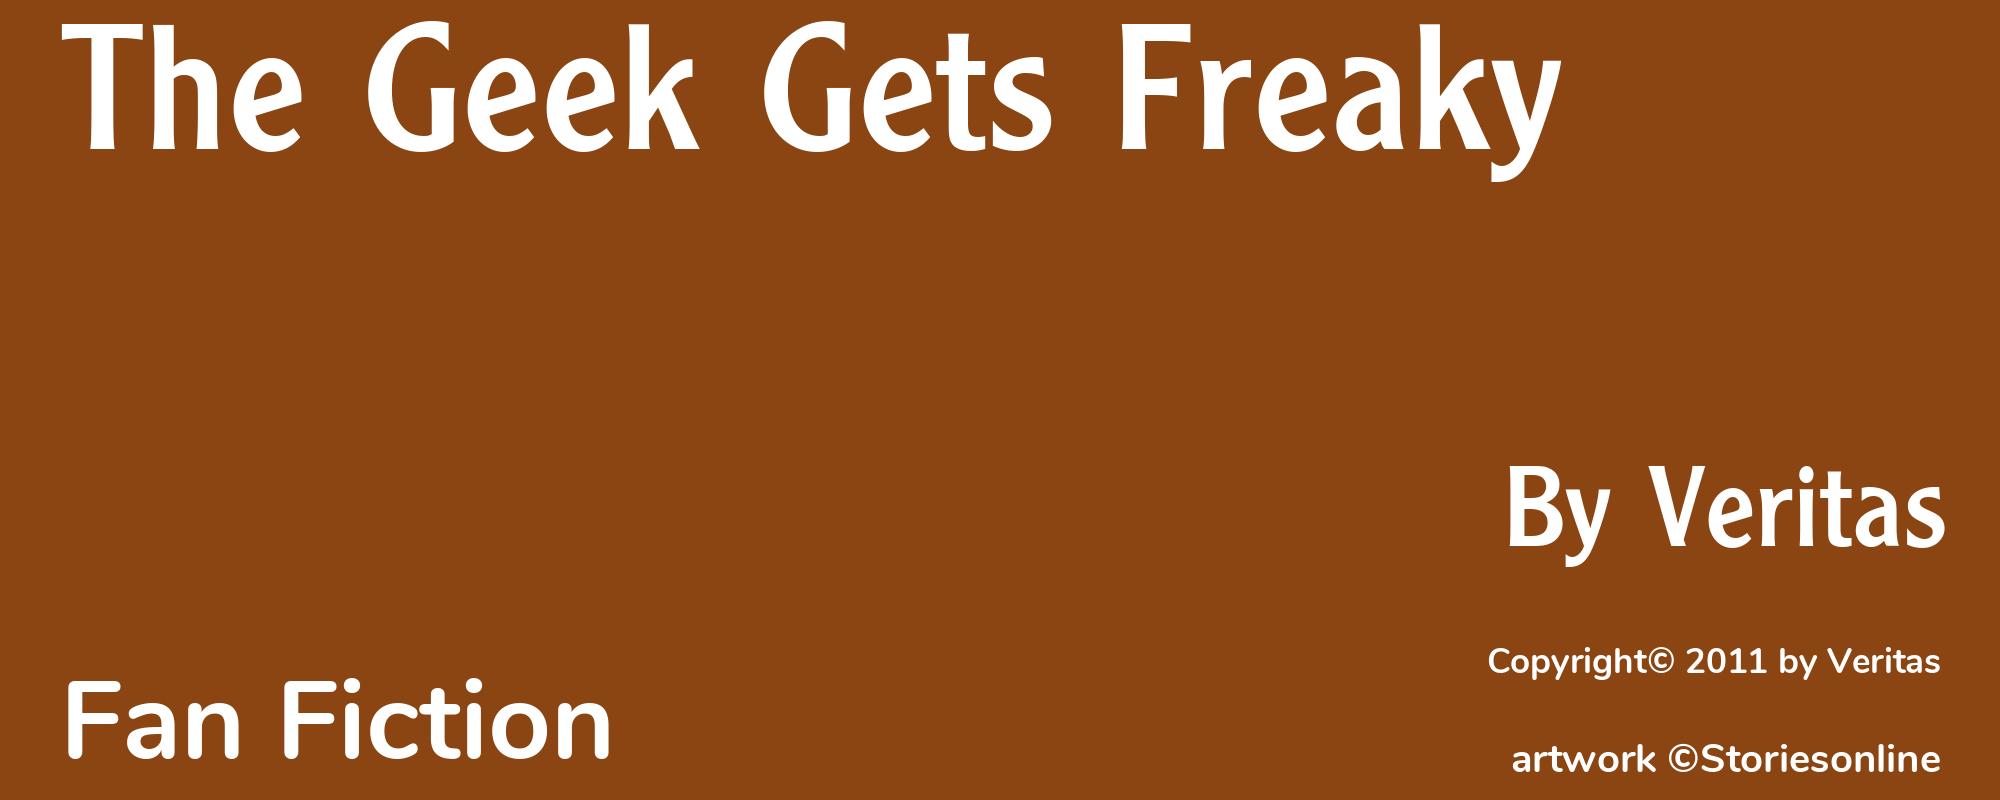 The Geek Gets Freaky - Cover